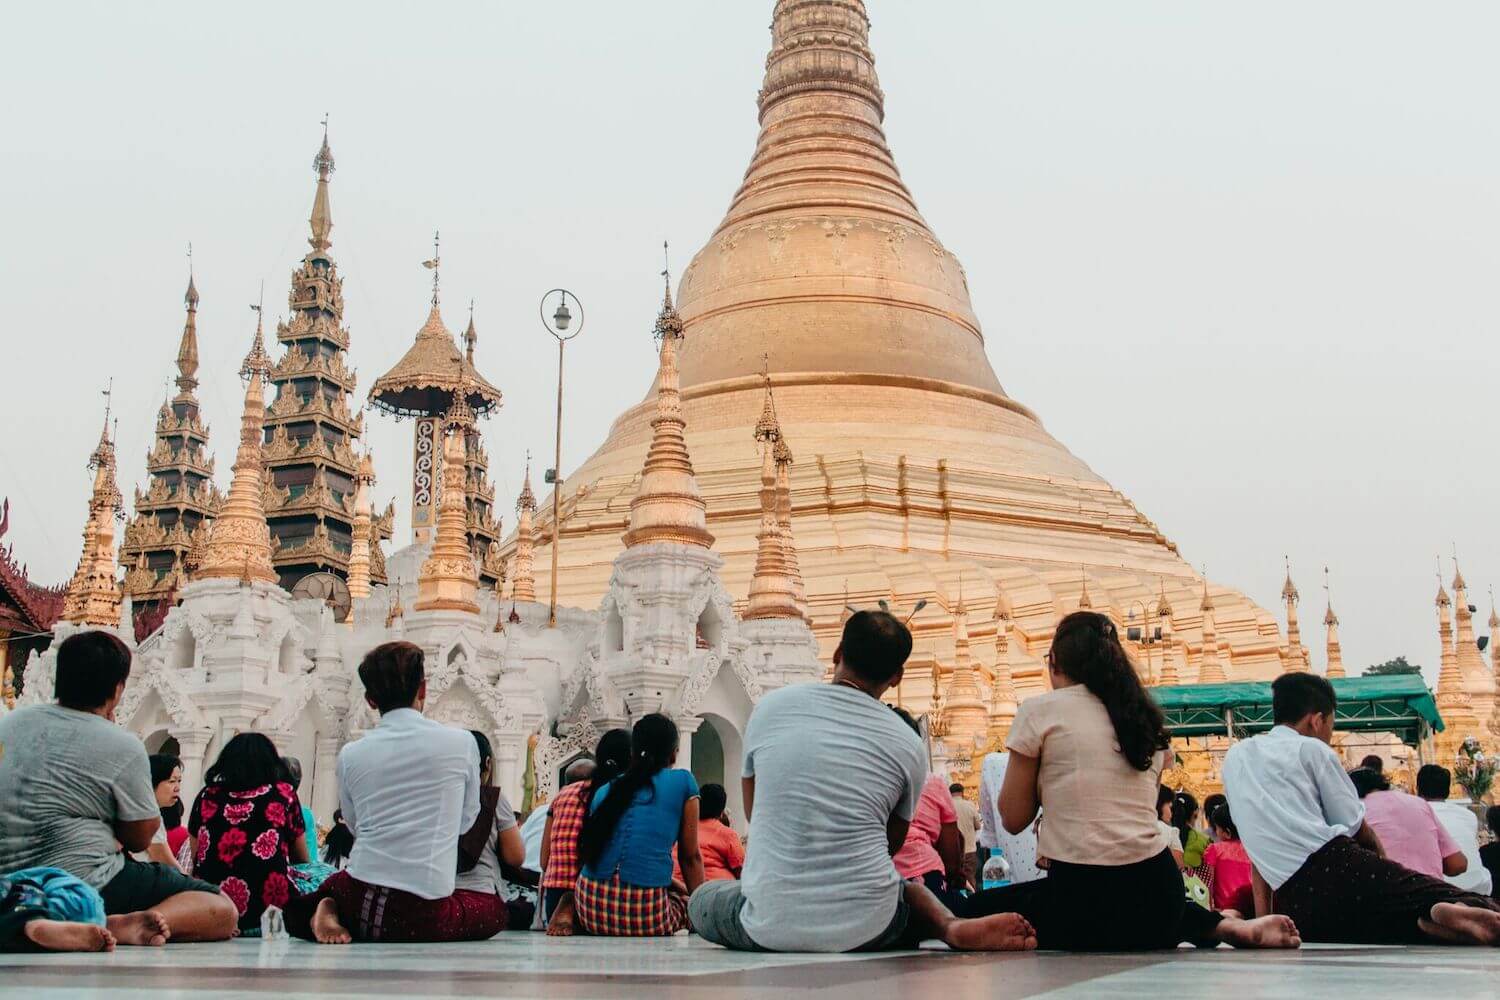 Best Myanmar Itinerary: Photo of Shwedagon Pagoda in Yangon Myanmar, the Golden Temple, with people sitting beneath the tallest spire at dusk. photo taken by Ryan Brown of Lost Boy Memoirs with Canon 650D Rebel T4i, edited in Lightroom.